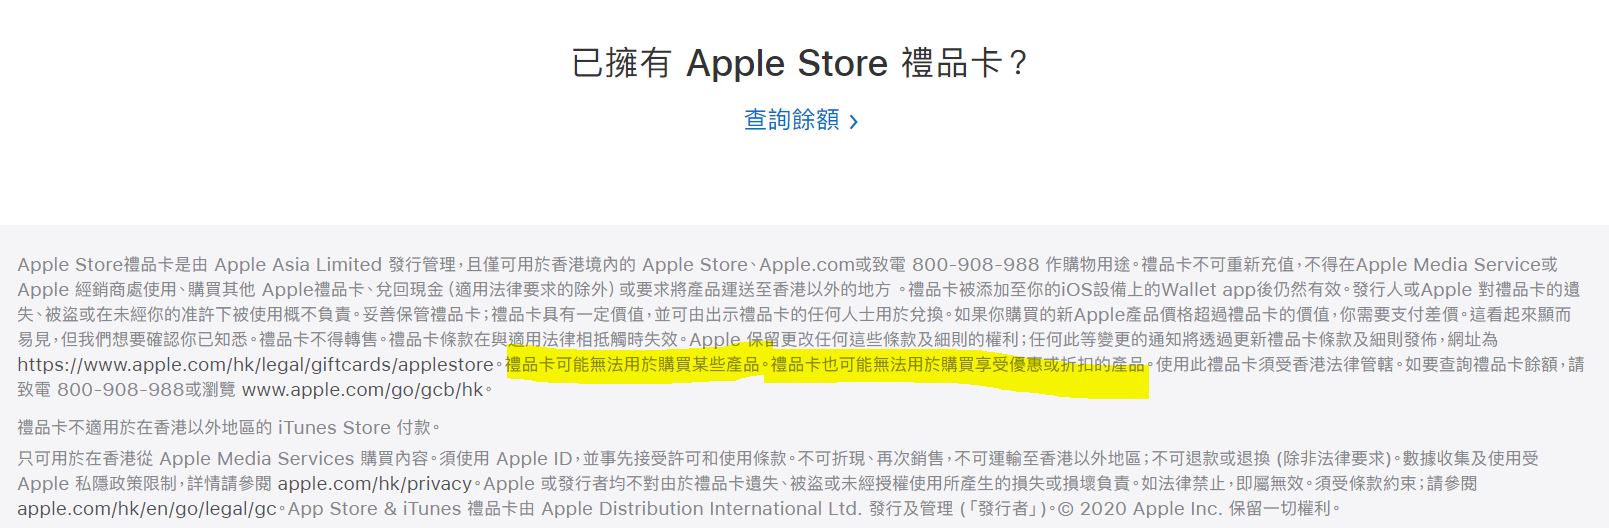 apple gift card exclusion